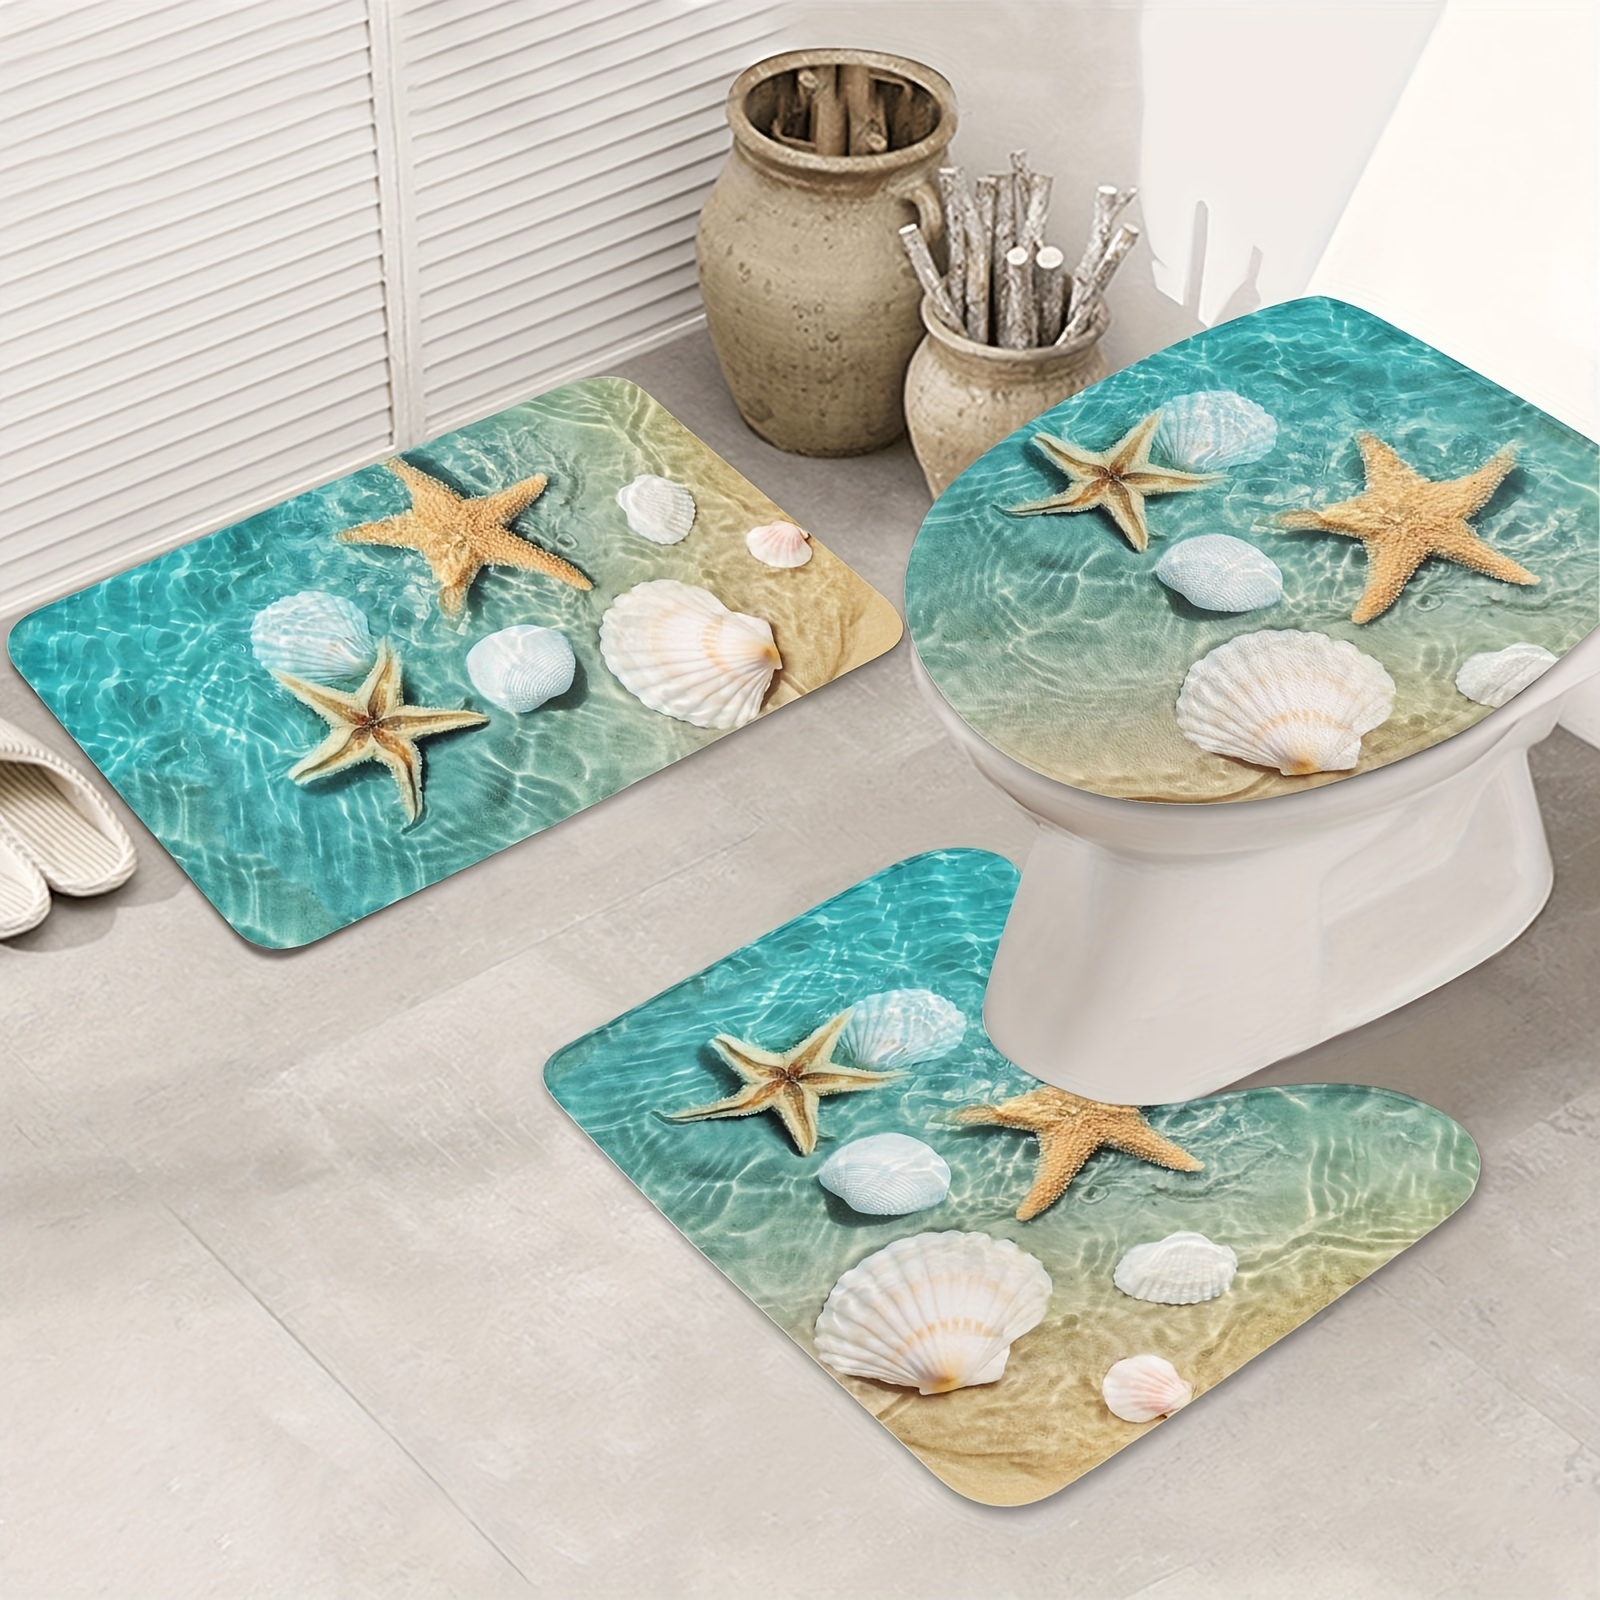 

3pcs Non-slip Starfish Seashell Bathroom Mat Set - Washable Flannel Floor Mat For Toilet Lid Cover And U-shape Mat - Bathroom Decor And Safety